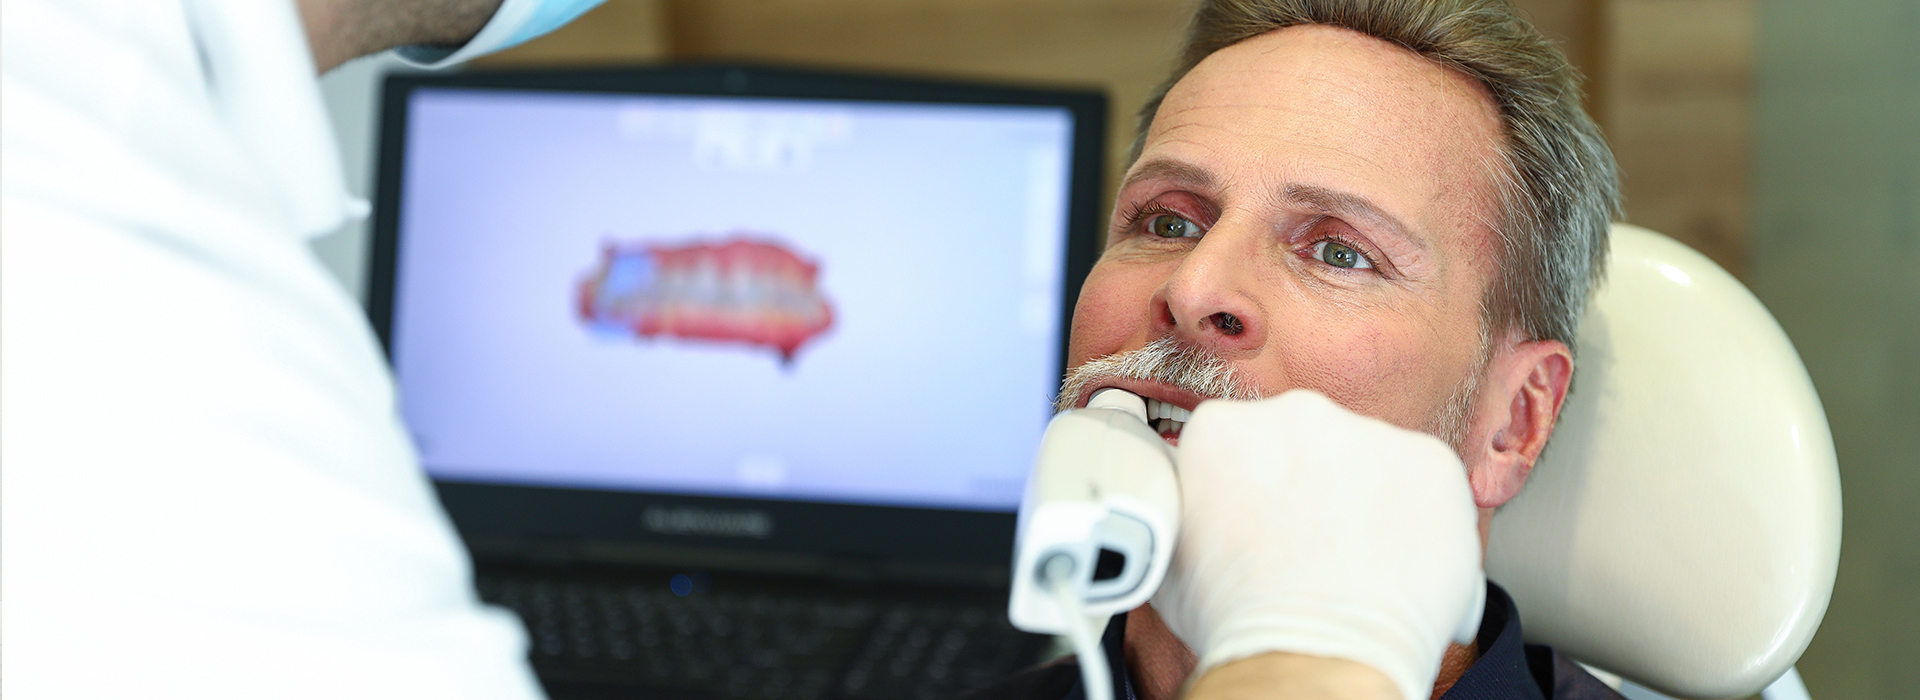 New Image Dentistry | Oral Exams, Emergency Treatment and Sedation Dentistry